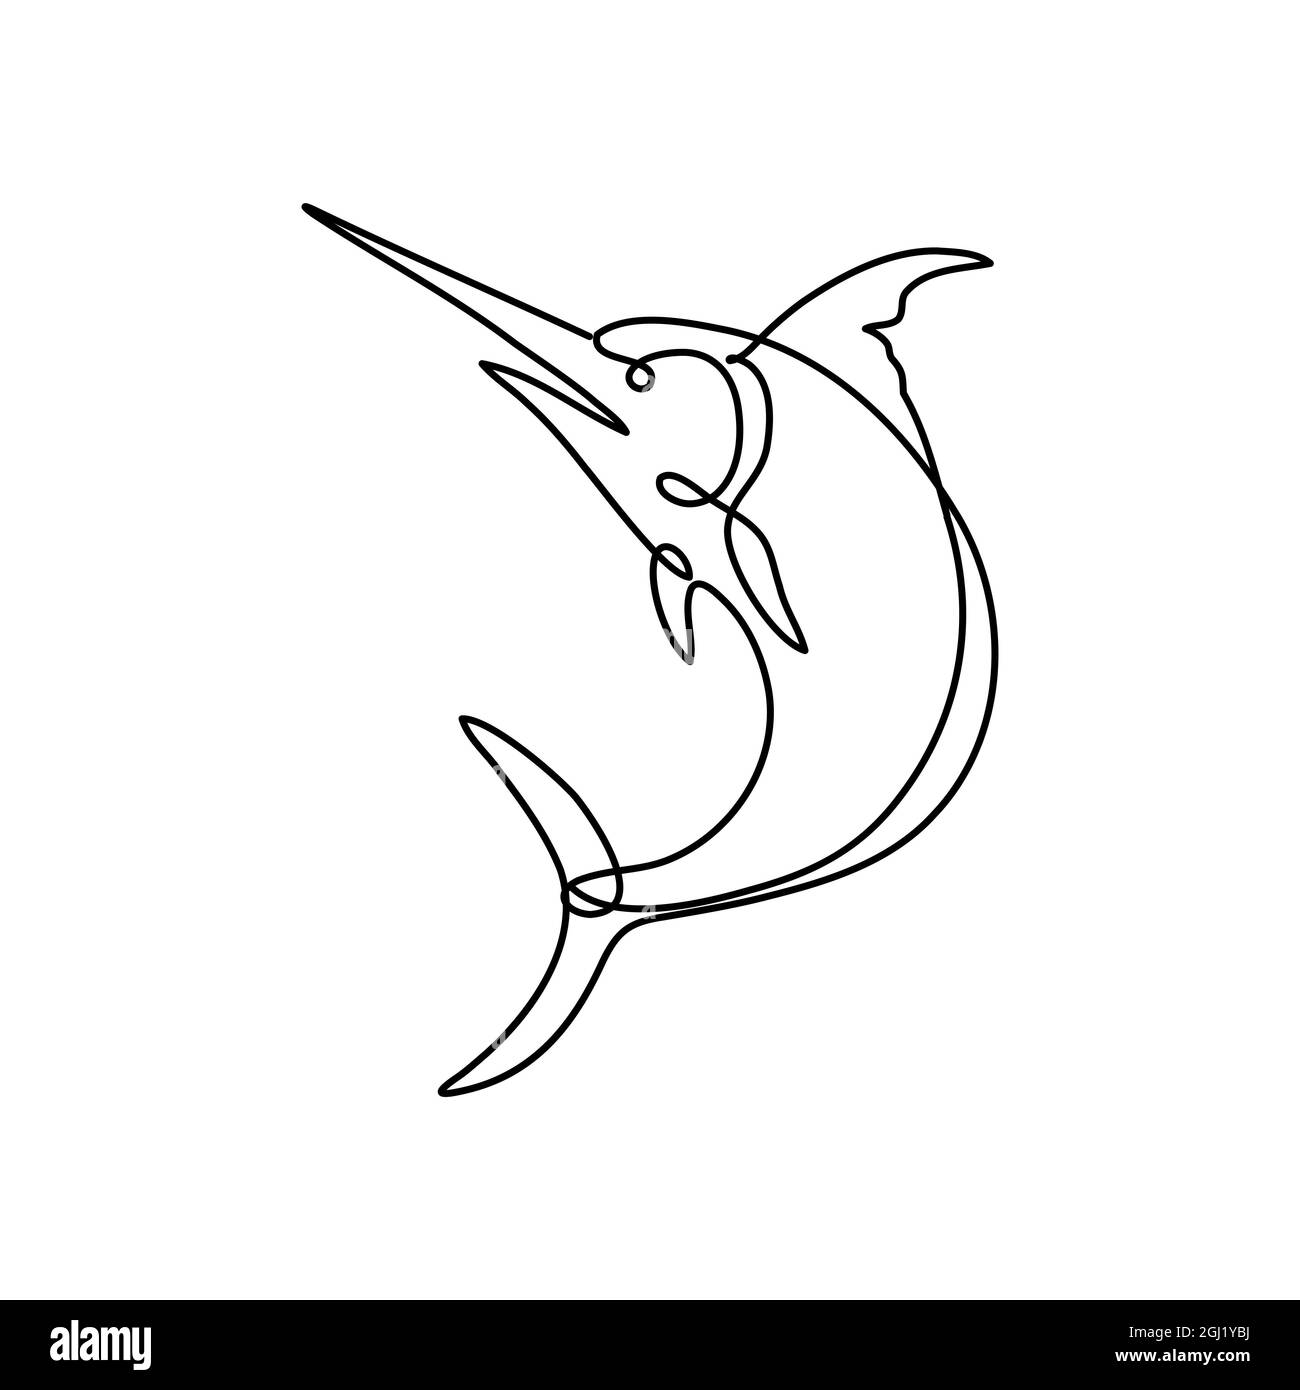 Atlantic Blue Marlin Jumping Up Continuous Line Drawing Stock Photo